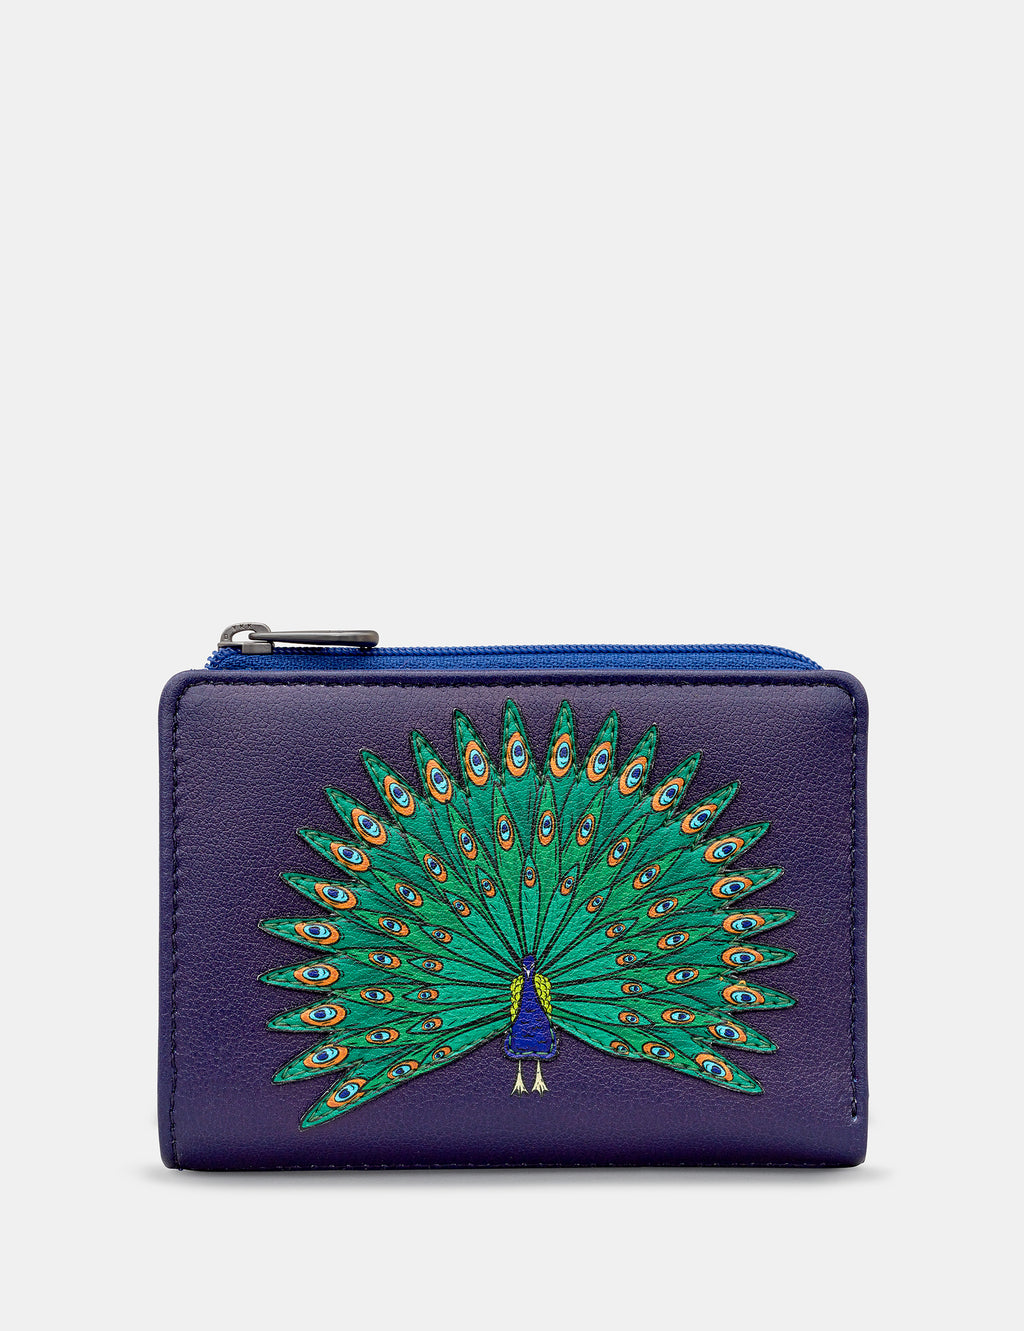 Peacock Leather Flap Over Purse